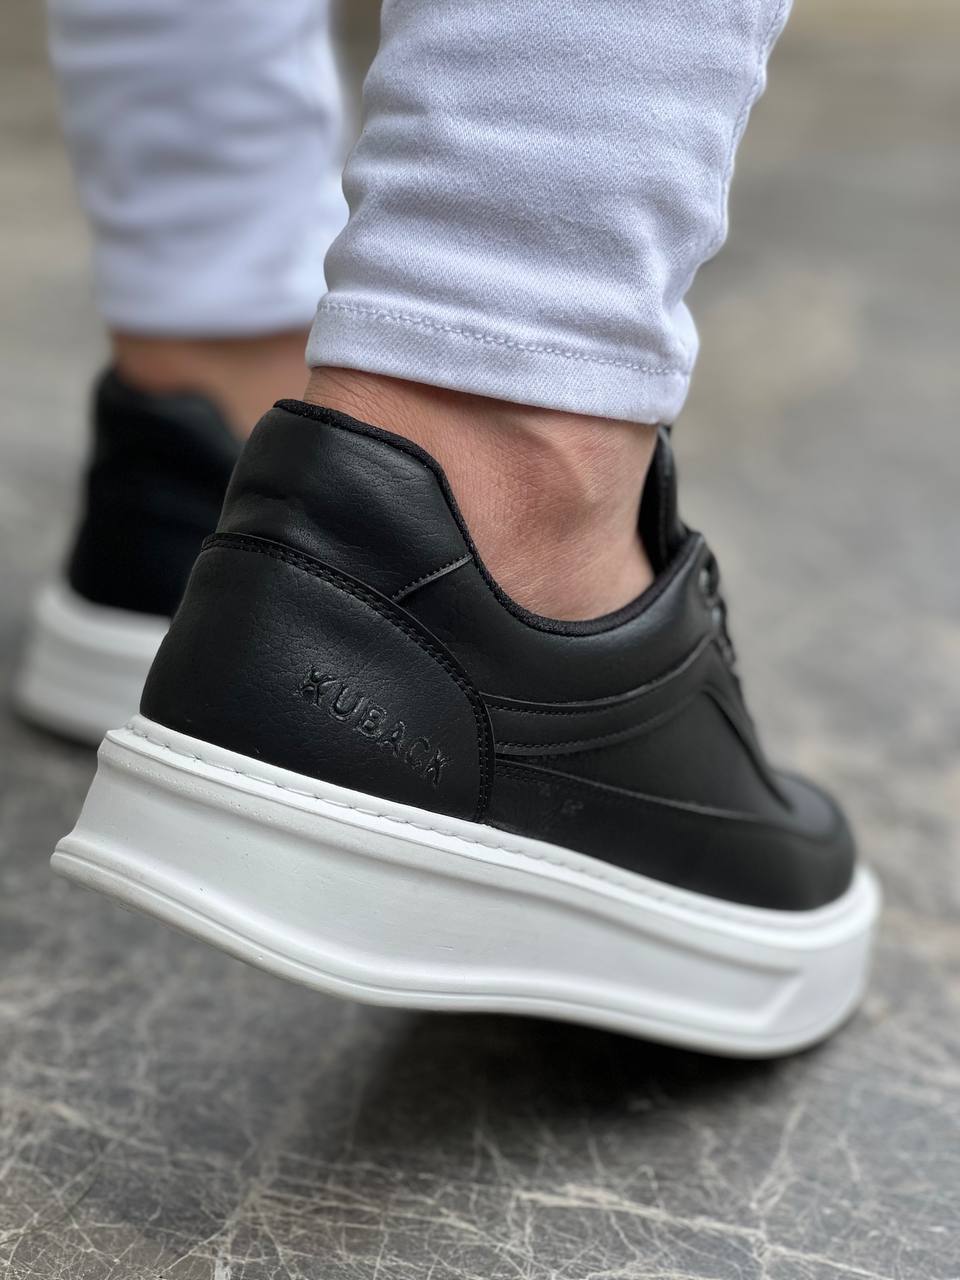 KB-006 Black Skin High Sole Laced Casual Men's Shoes - STREETMODE™